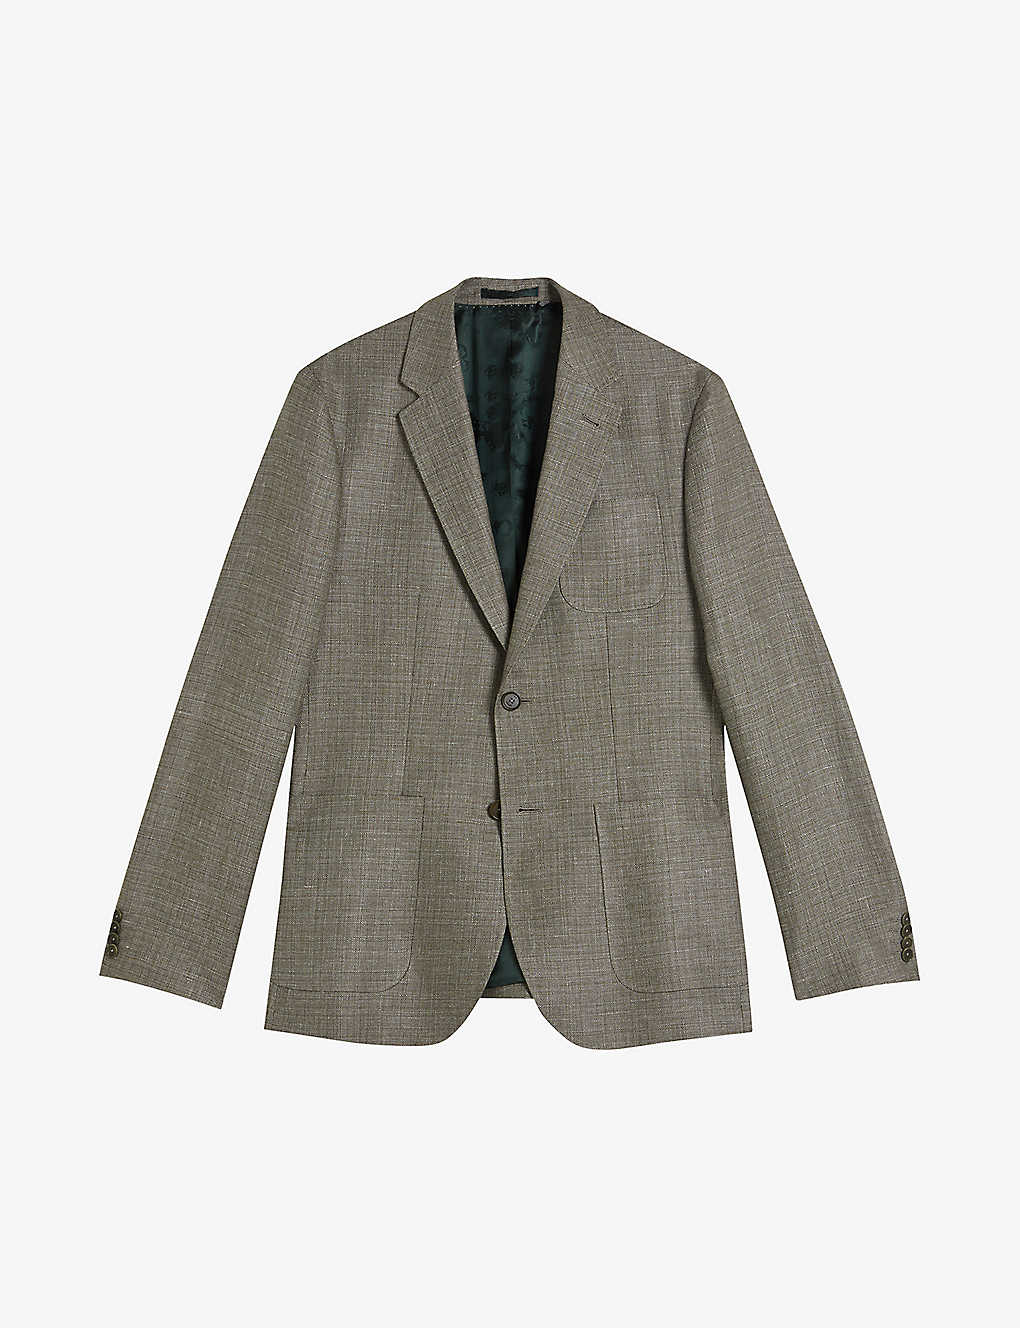 TED BAKER TED BAKER MEN'S DK-GREEN TAYLORJ SLIM-FIT SINGLE-BREASTED LINEN AND WOOL-BLEND SUIT JACKET